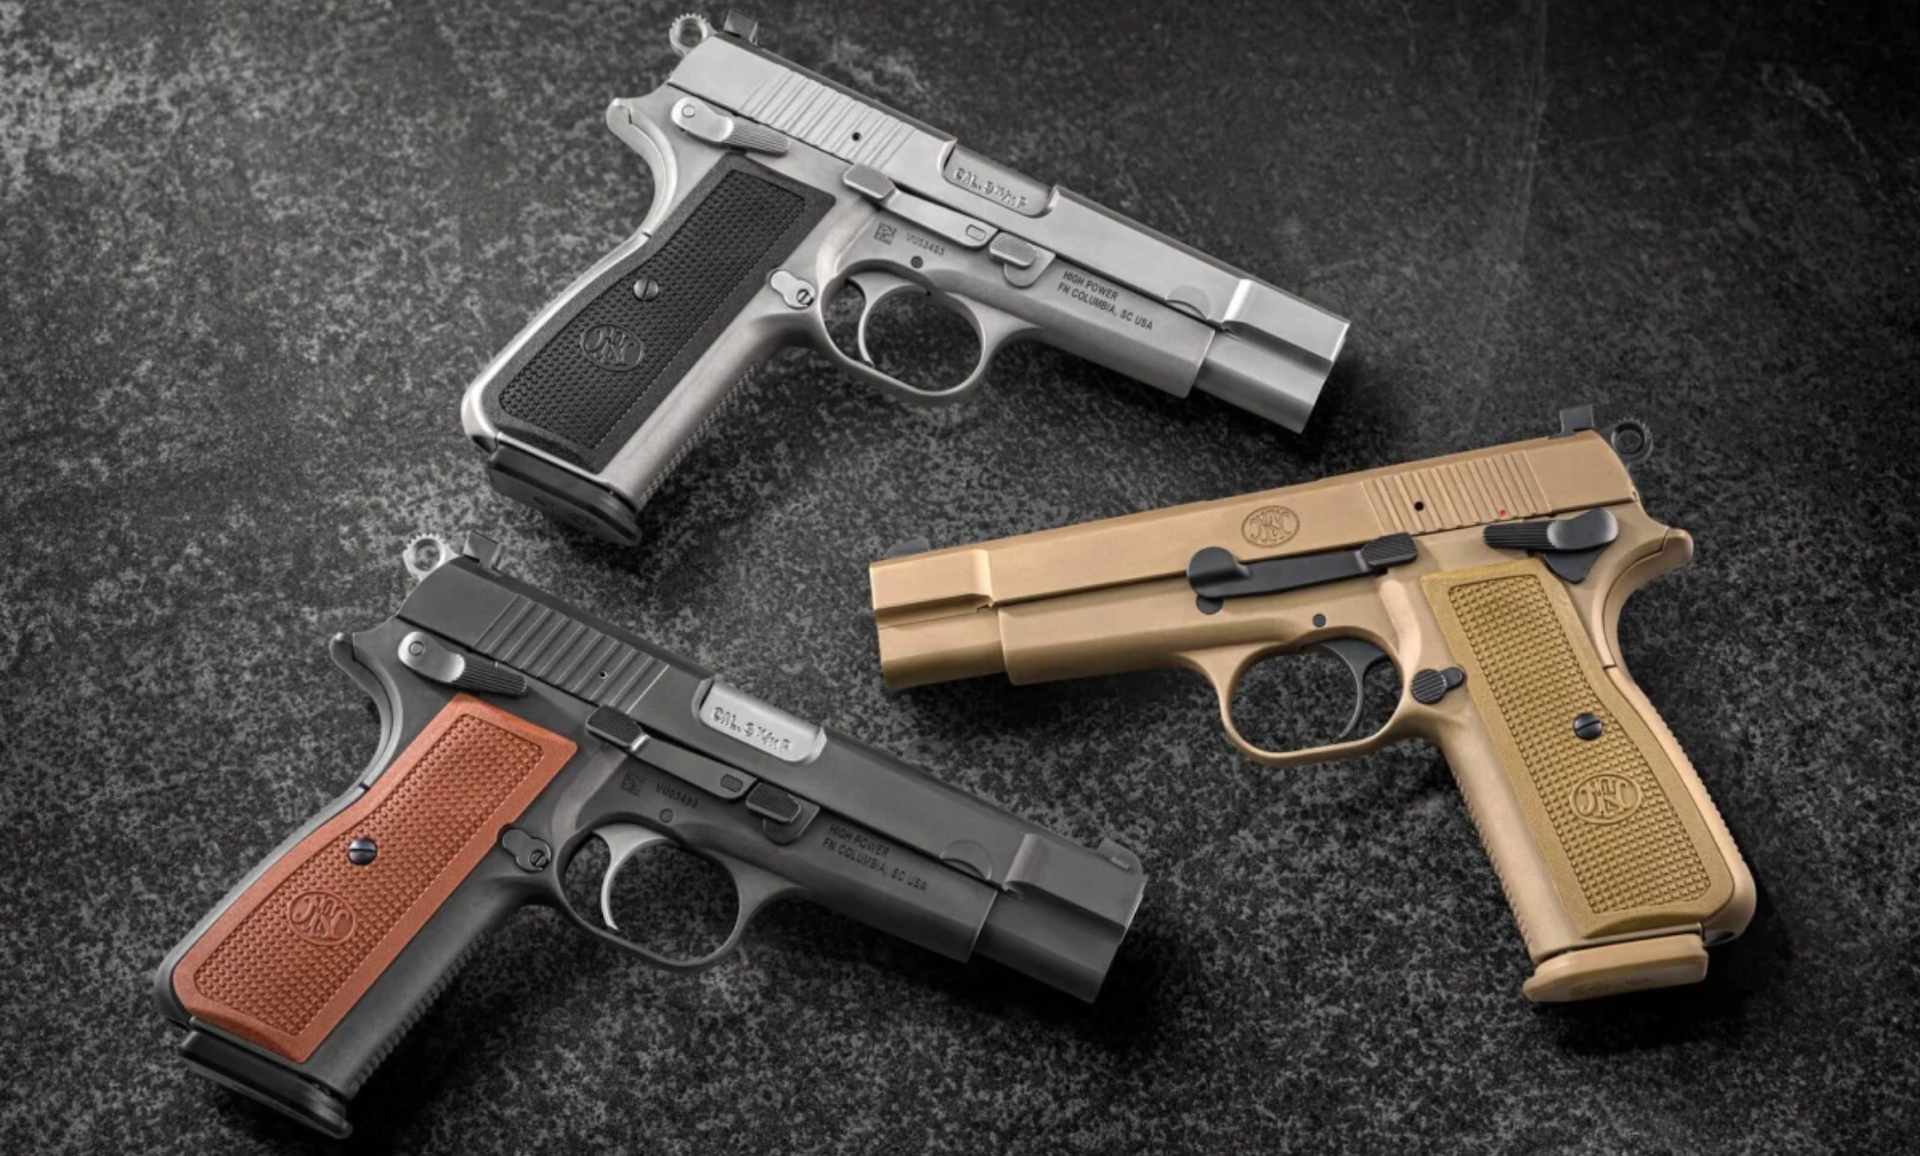 FN unveils new High Power version of classic Hi-Power pistol